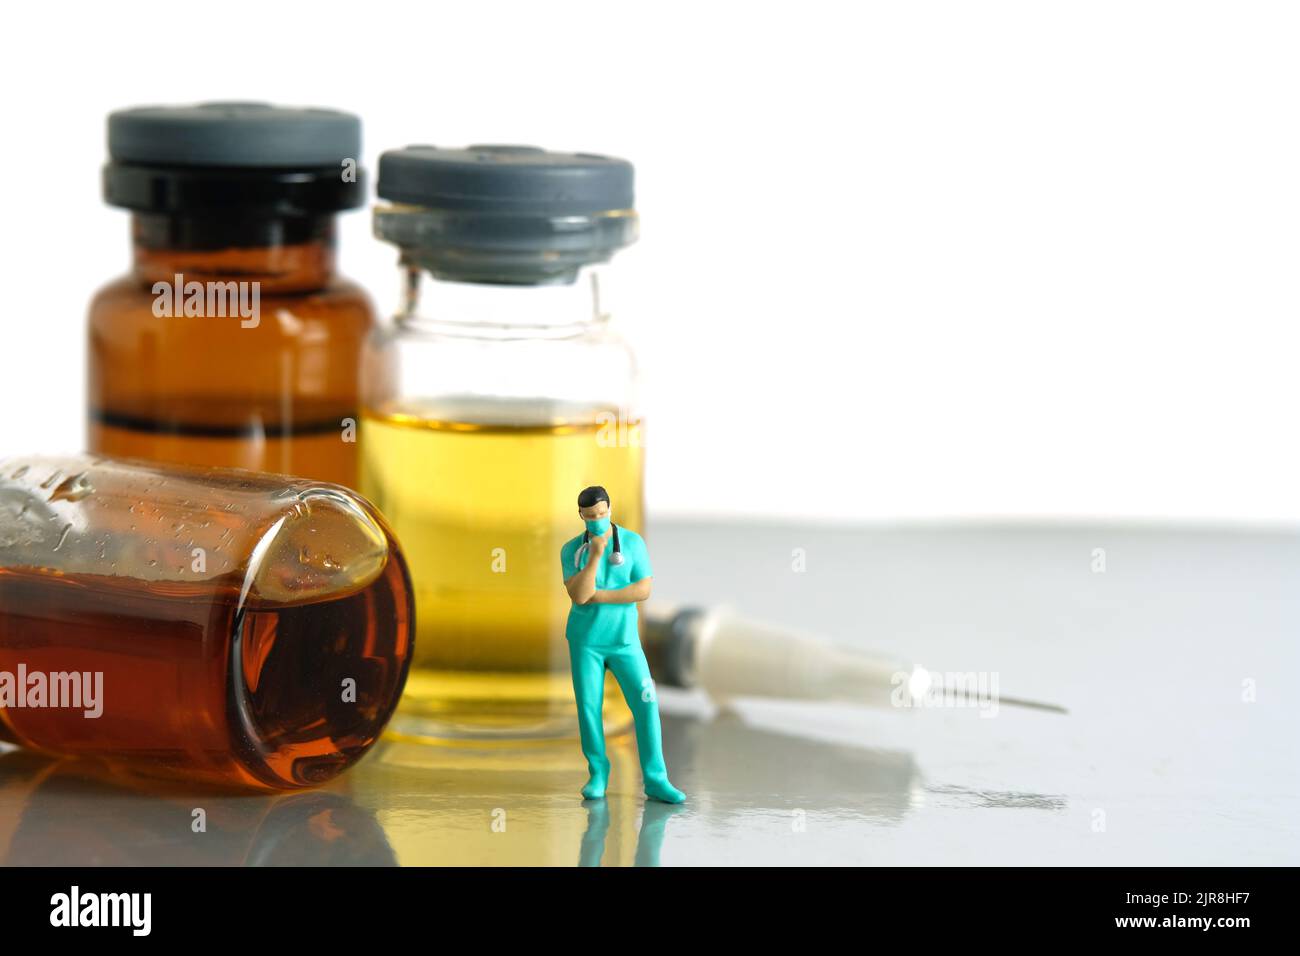 Miniature people toy figure photography. Urine test concept. A nurse standing in front of ampoule bottle and syringe. Image photo Stock Photo